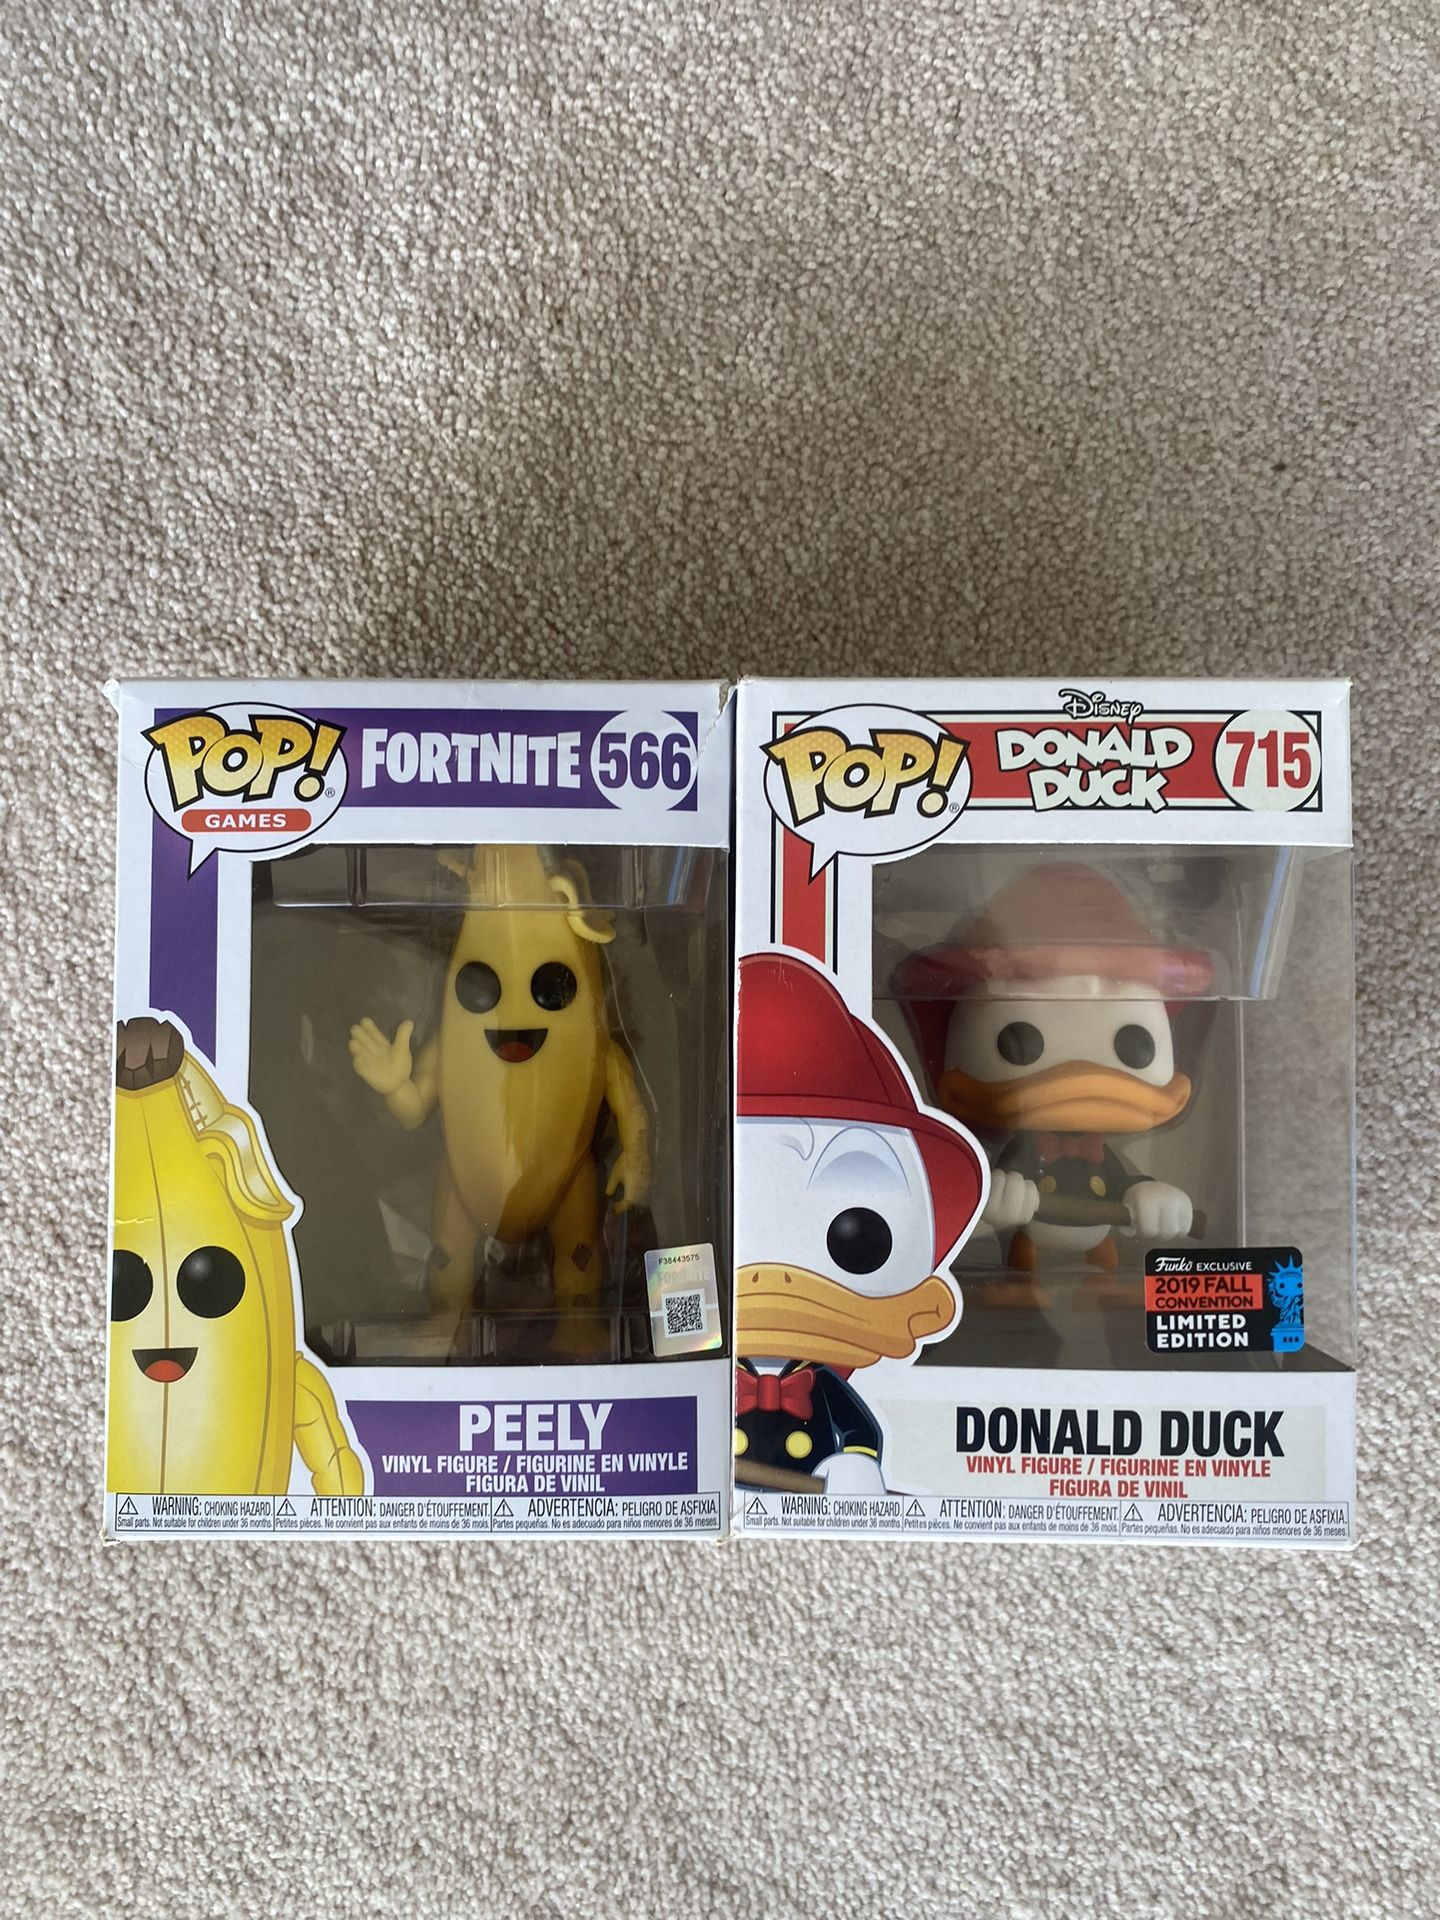 Peely and donald duck funko pops can sell seperatly